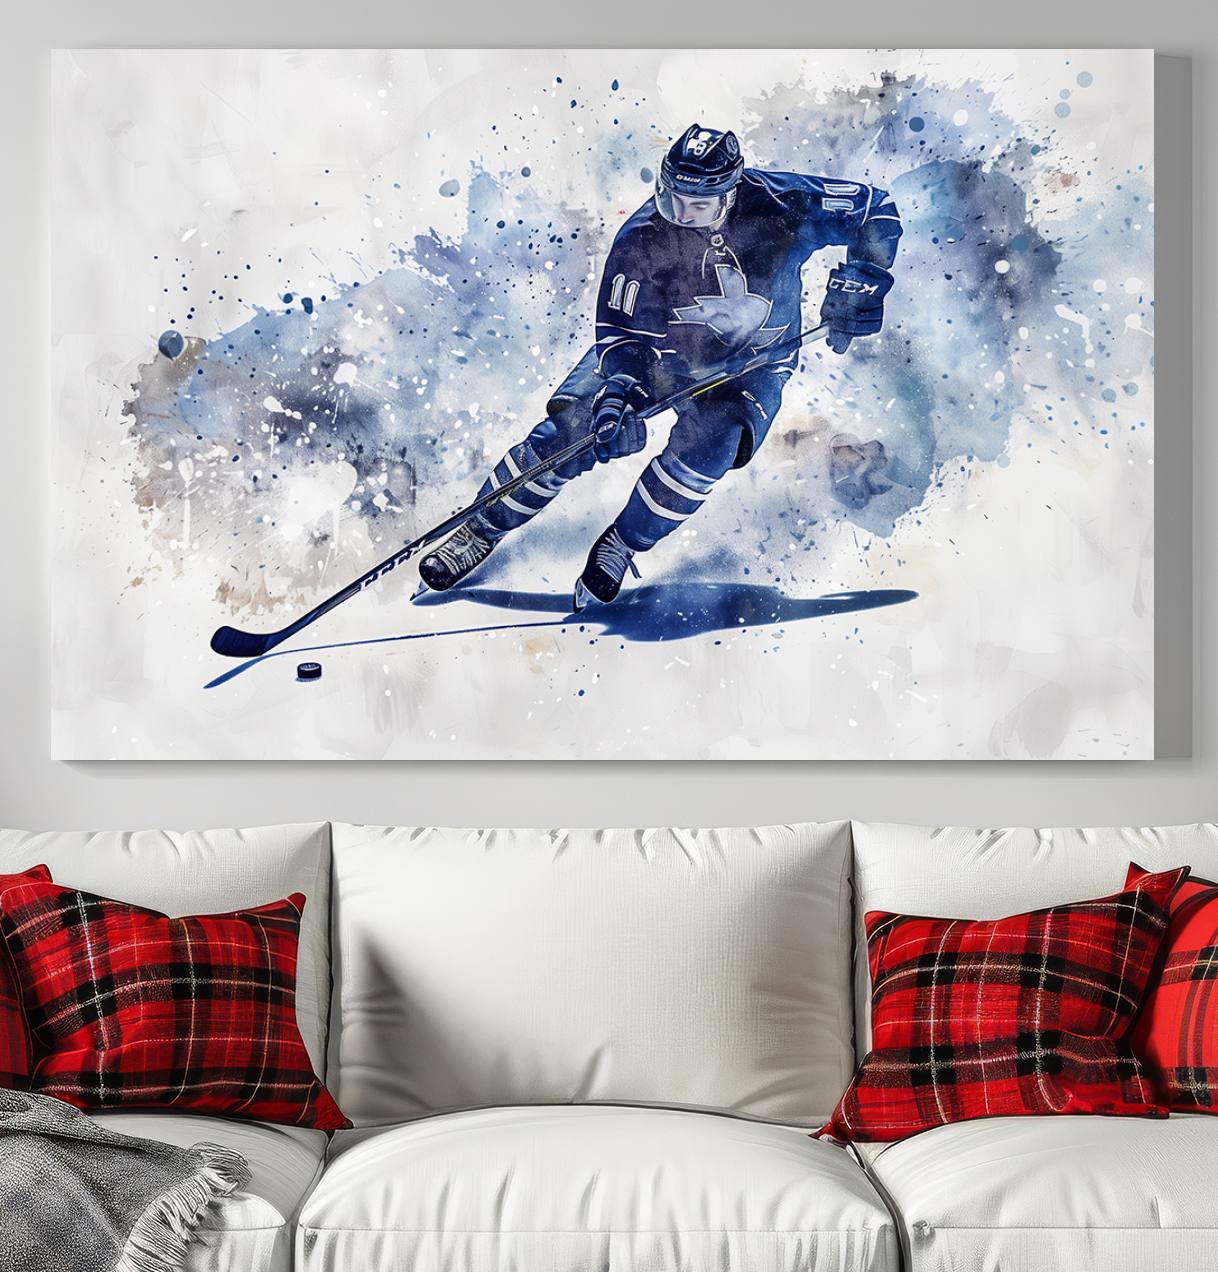 Abstract Watercolor Hockey Player Wall Art Canvas Print for Sport Room Decor